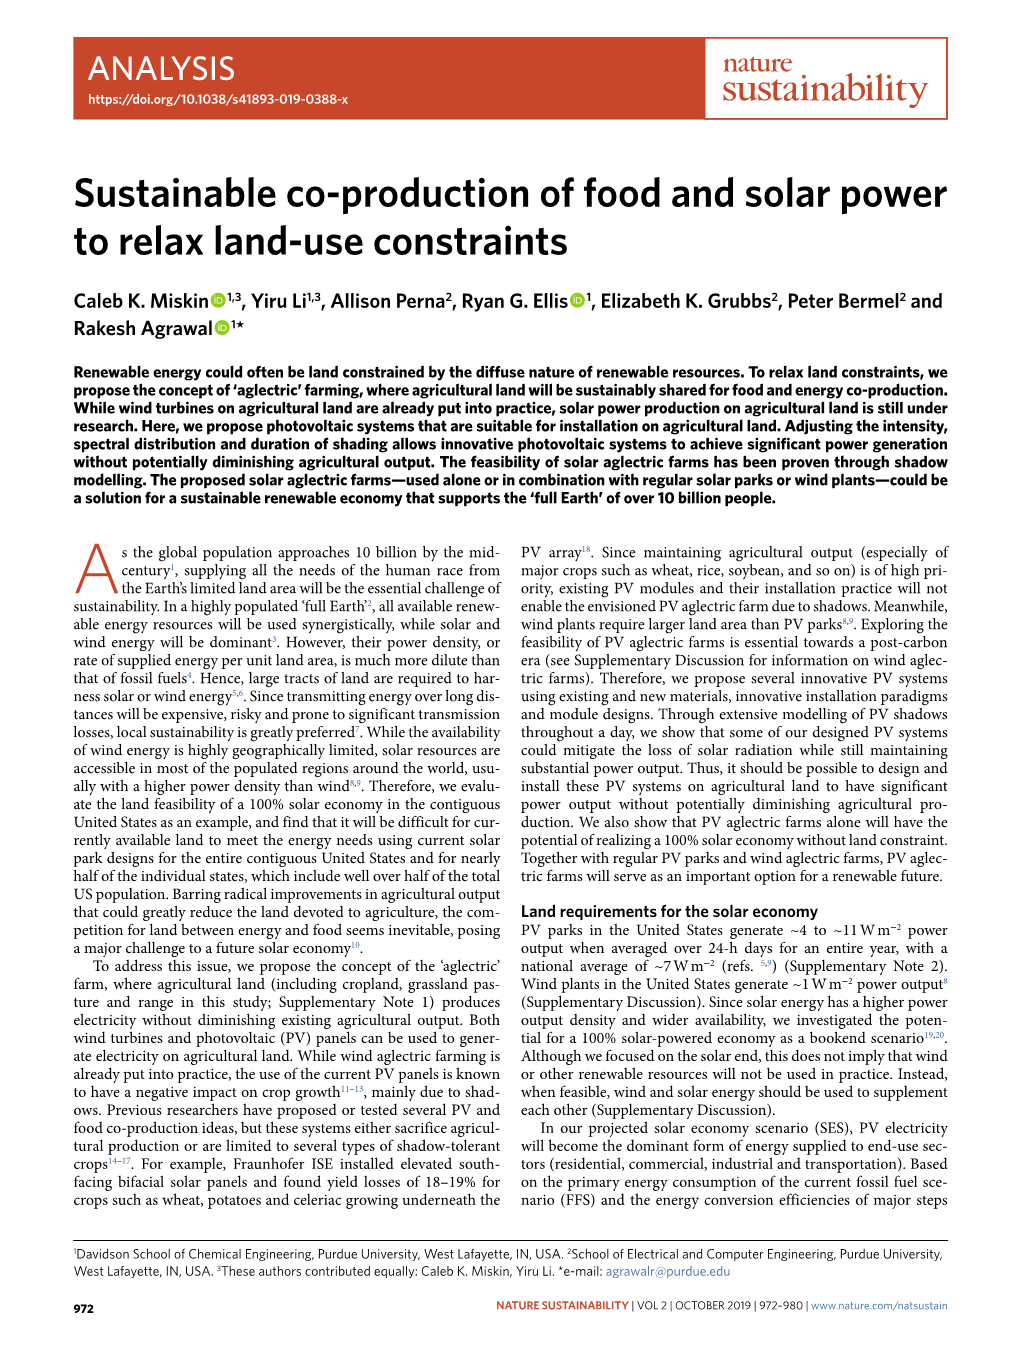 Sustainable Co-Production of Food and Solar Power to Relax Land-Use Constraints